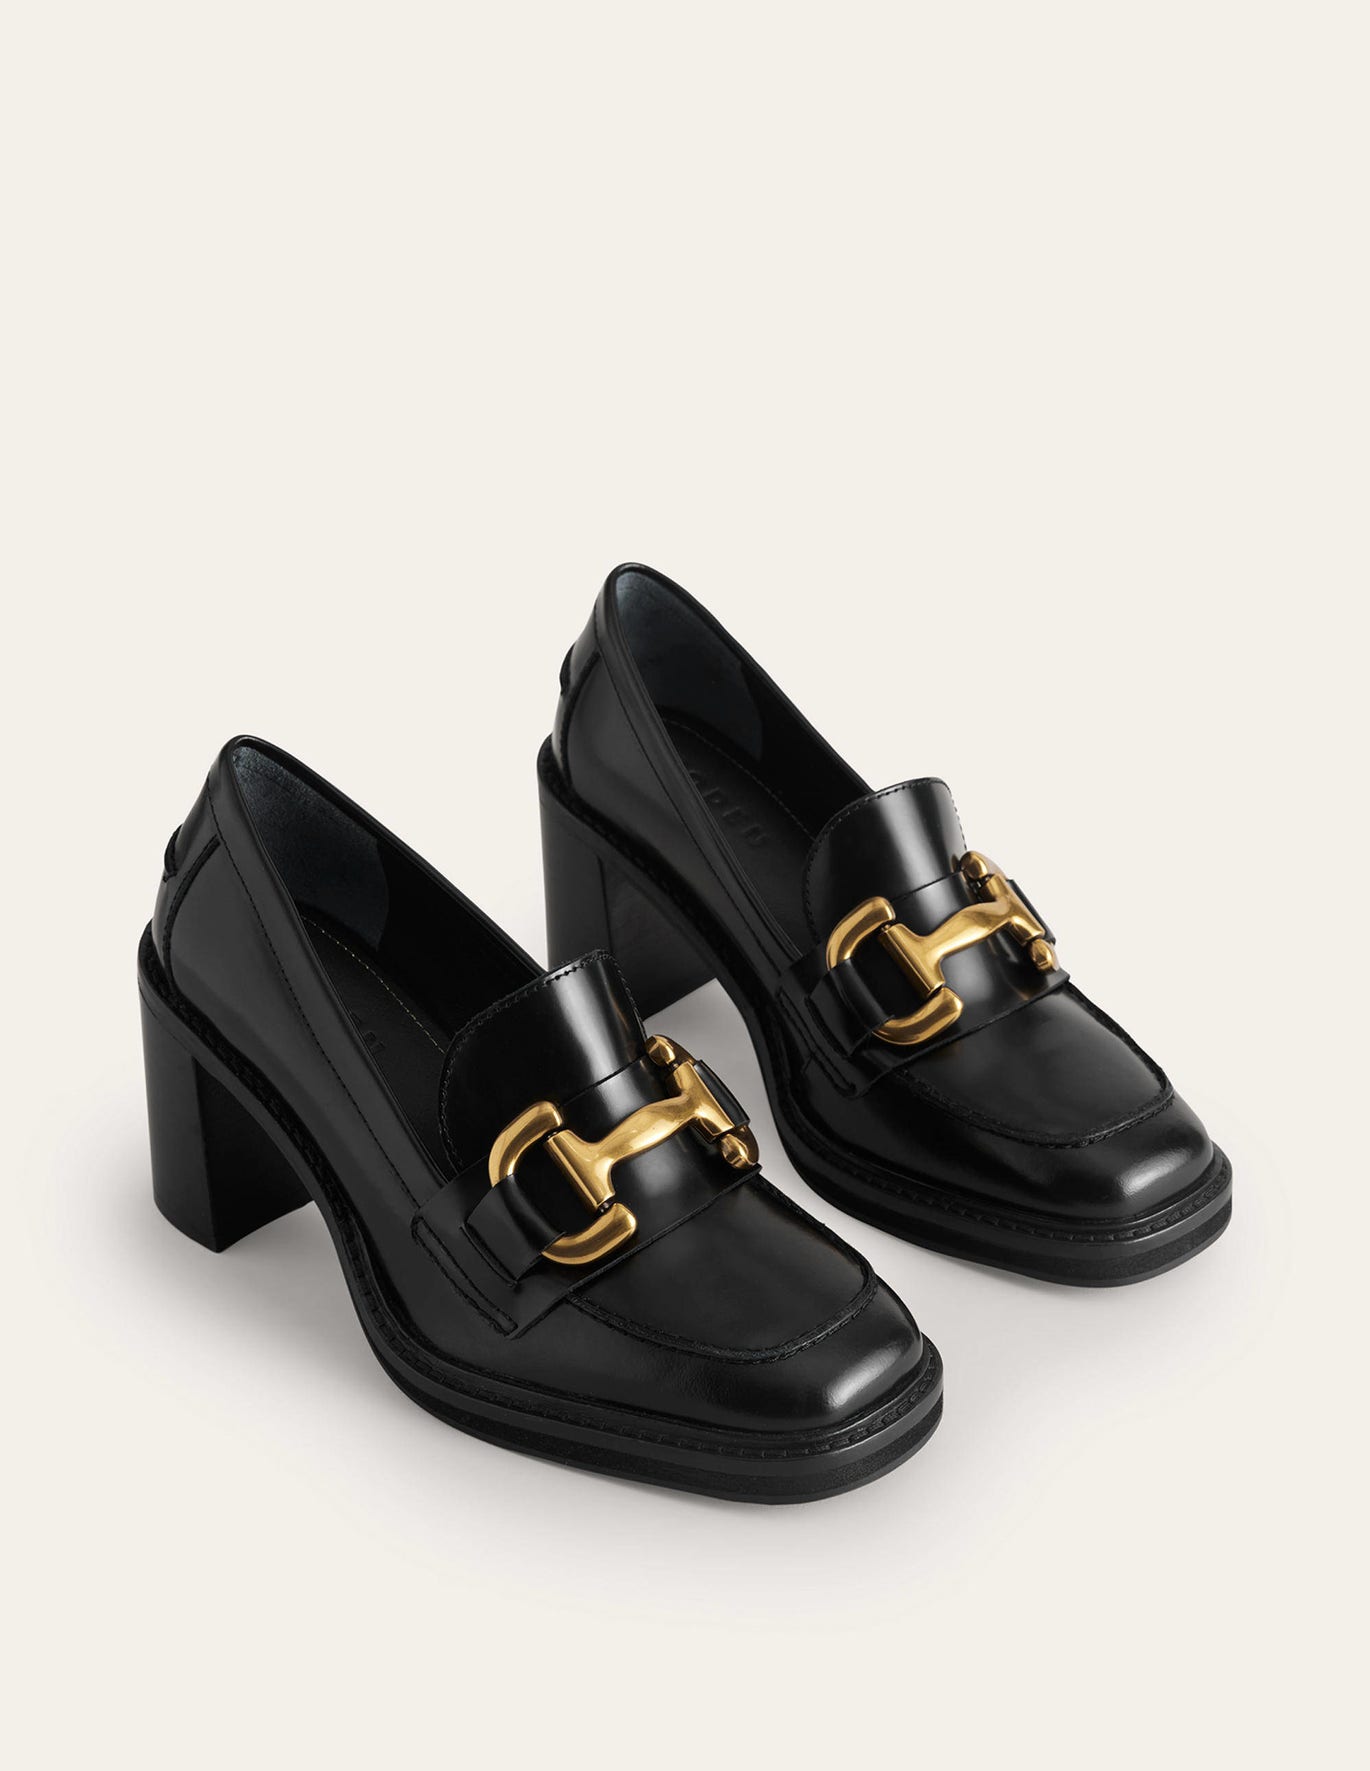 Boden Shoes Reviews: Stepping into Style and Comfort